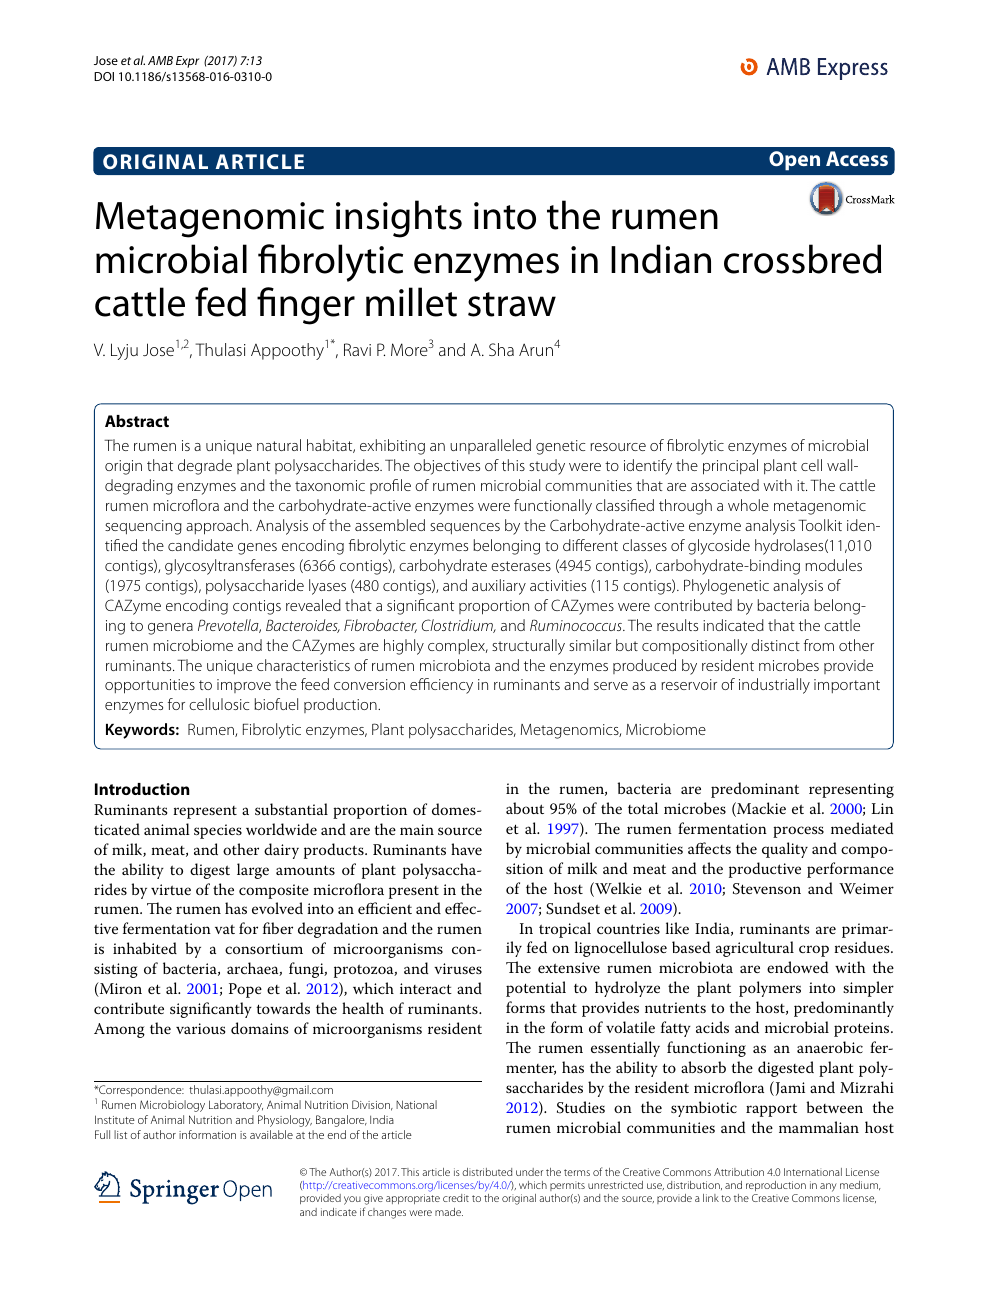 Metagenomic insights into the rumen microbial fibrolytic enzymes in Indian  crossbred cattle fed finger millet straw – topic of research paper in  Biological sciences. Download scholarly article PDF and read for free